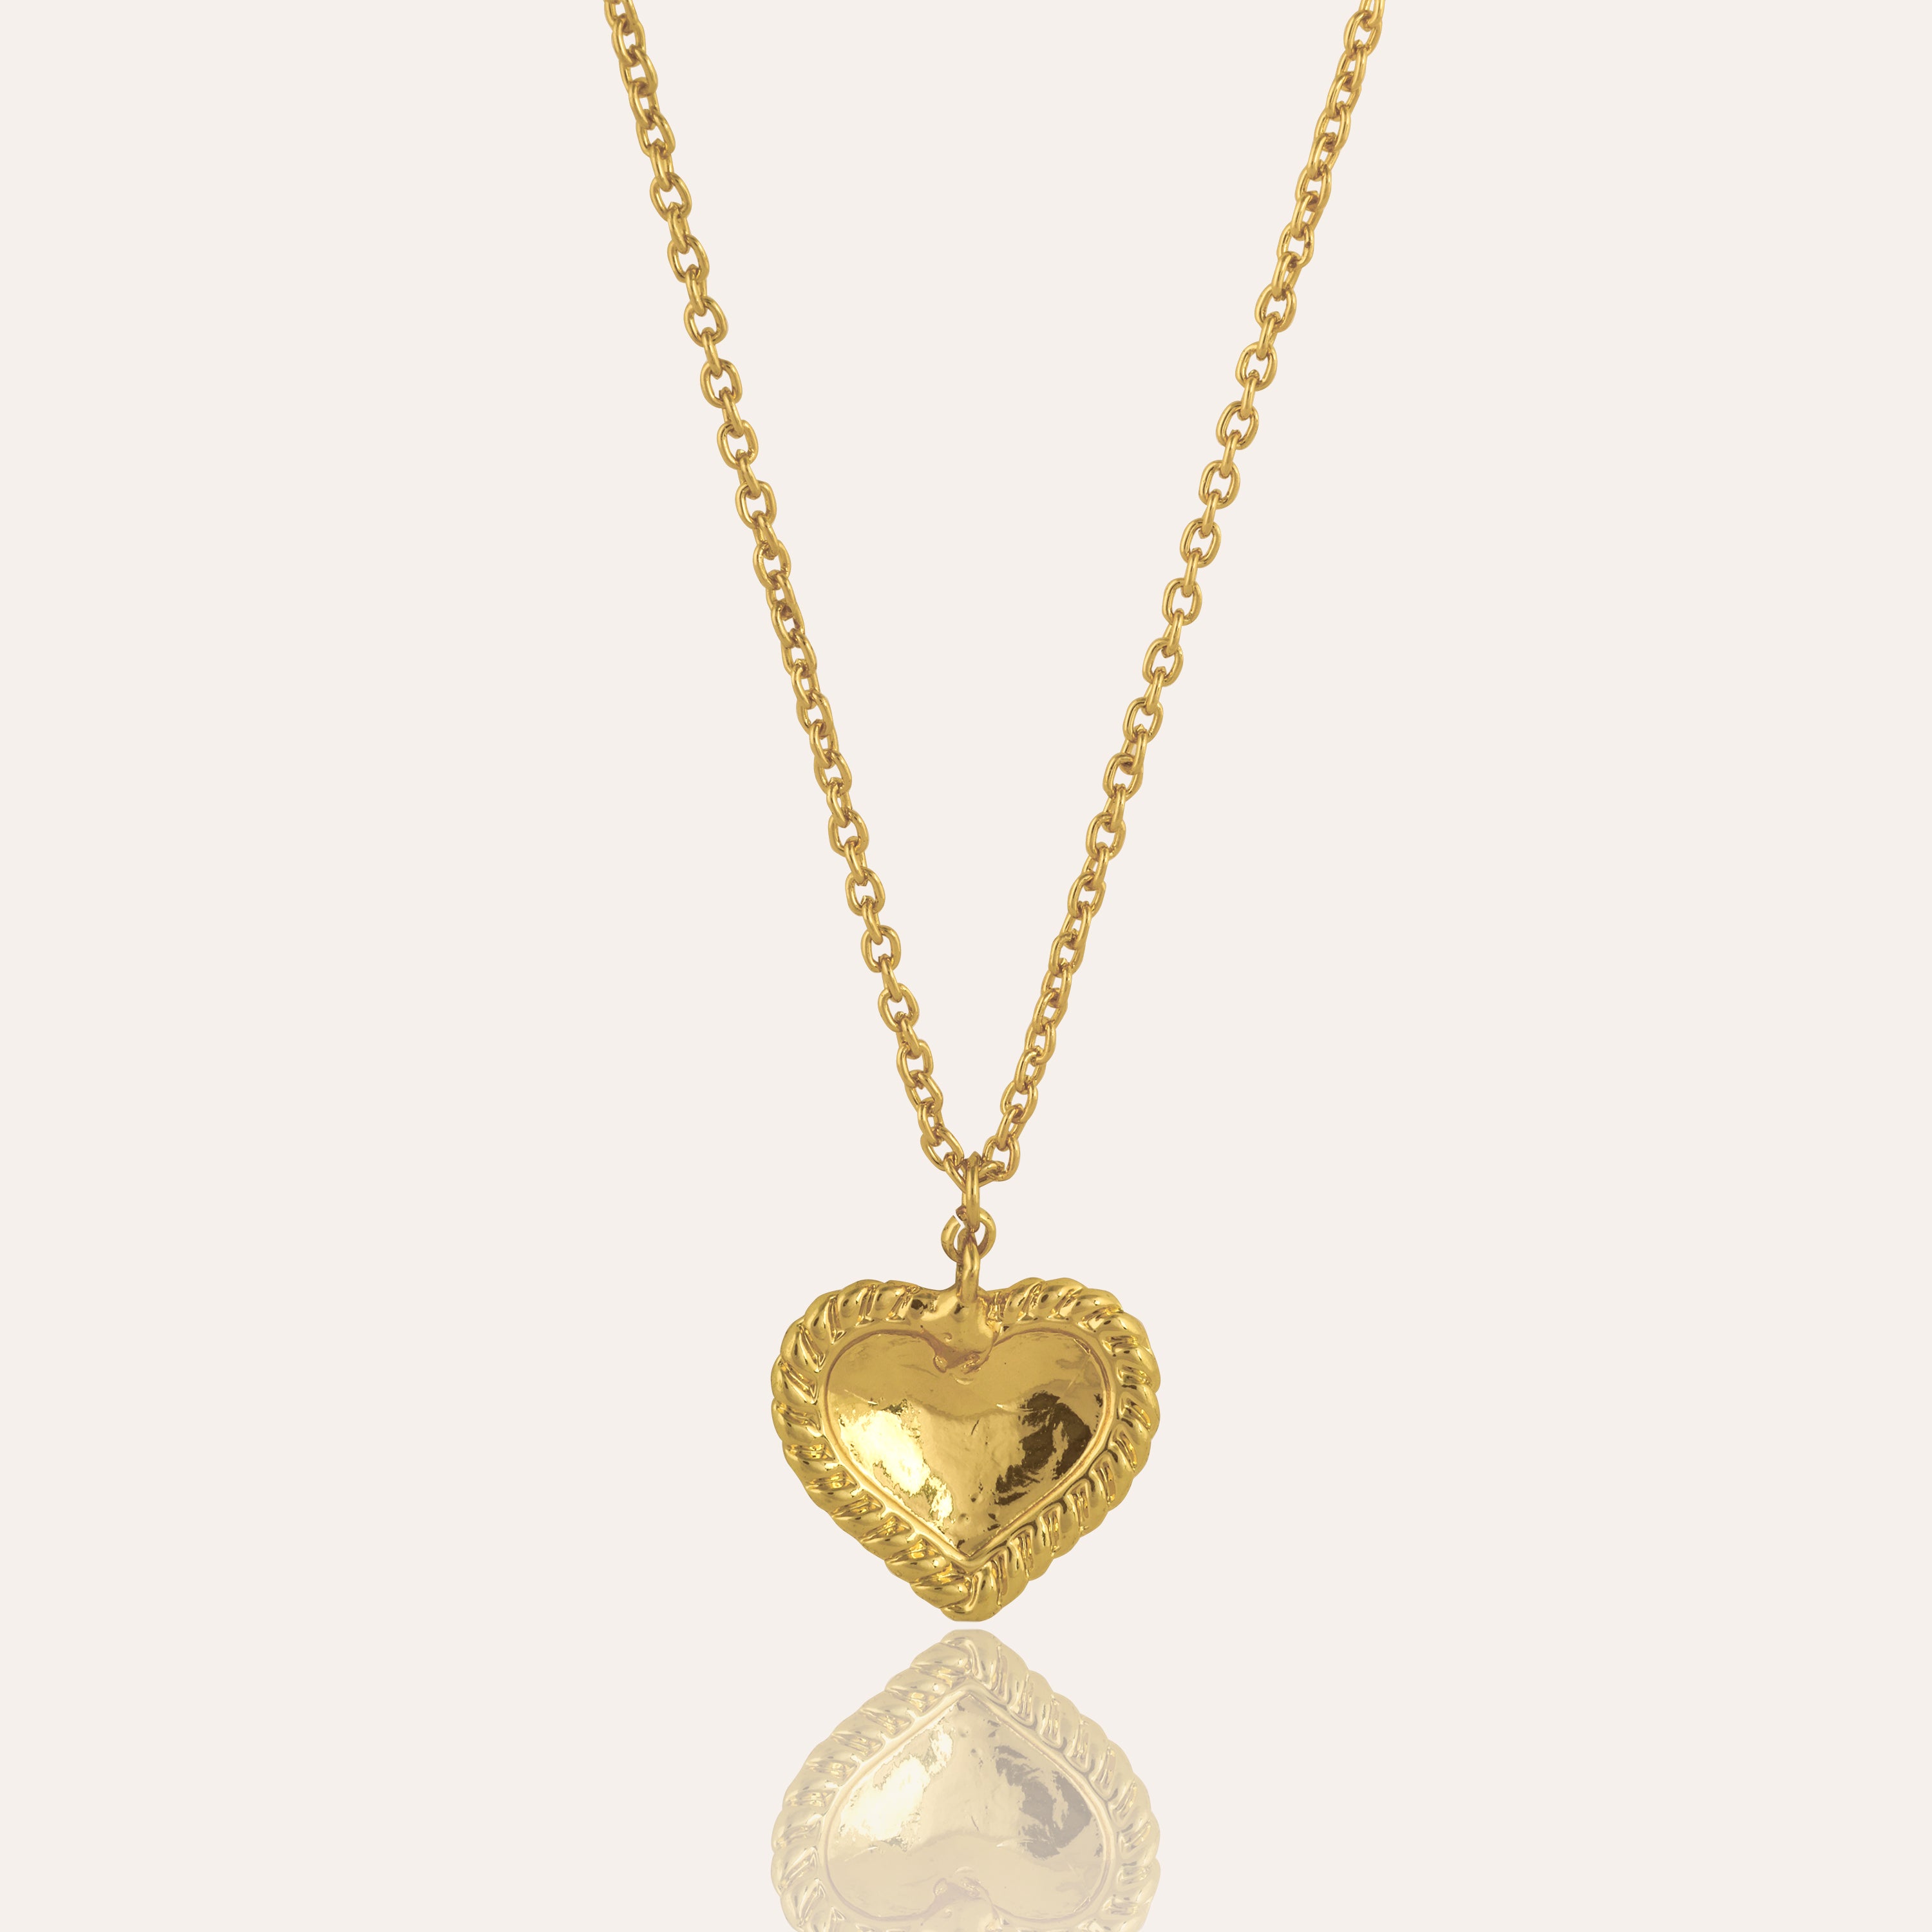 TFC Heartfelt Gold Plated Pendant Necklace-Enhance your elegance with our collection of gold-plated necklaces for women. Choose from stunning pendant necklaces, chic choker necklaces, and trendy layered necklaces. Our sleek and dainty designs are both affordable and anti-tarnish, ensuring lasting beauty. Enjoy the cheapest fashion jewellery, lightweight and stylish- only at The Fun Company.